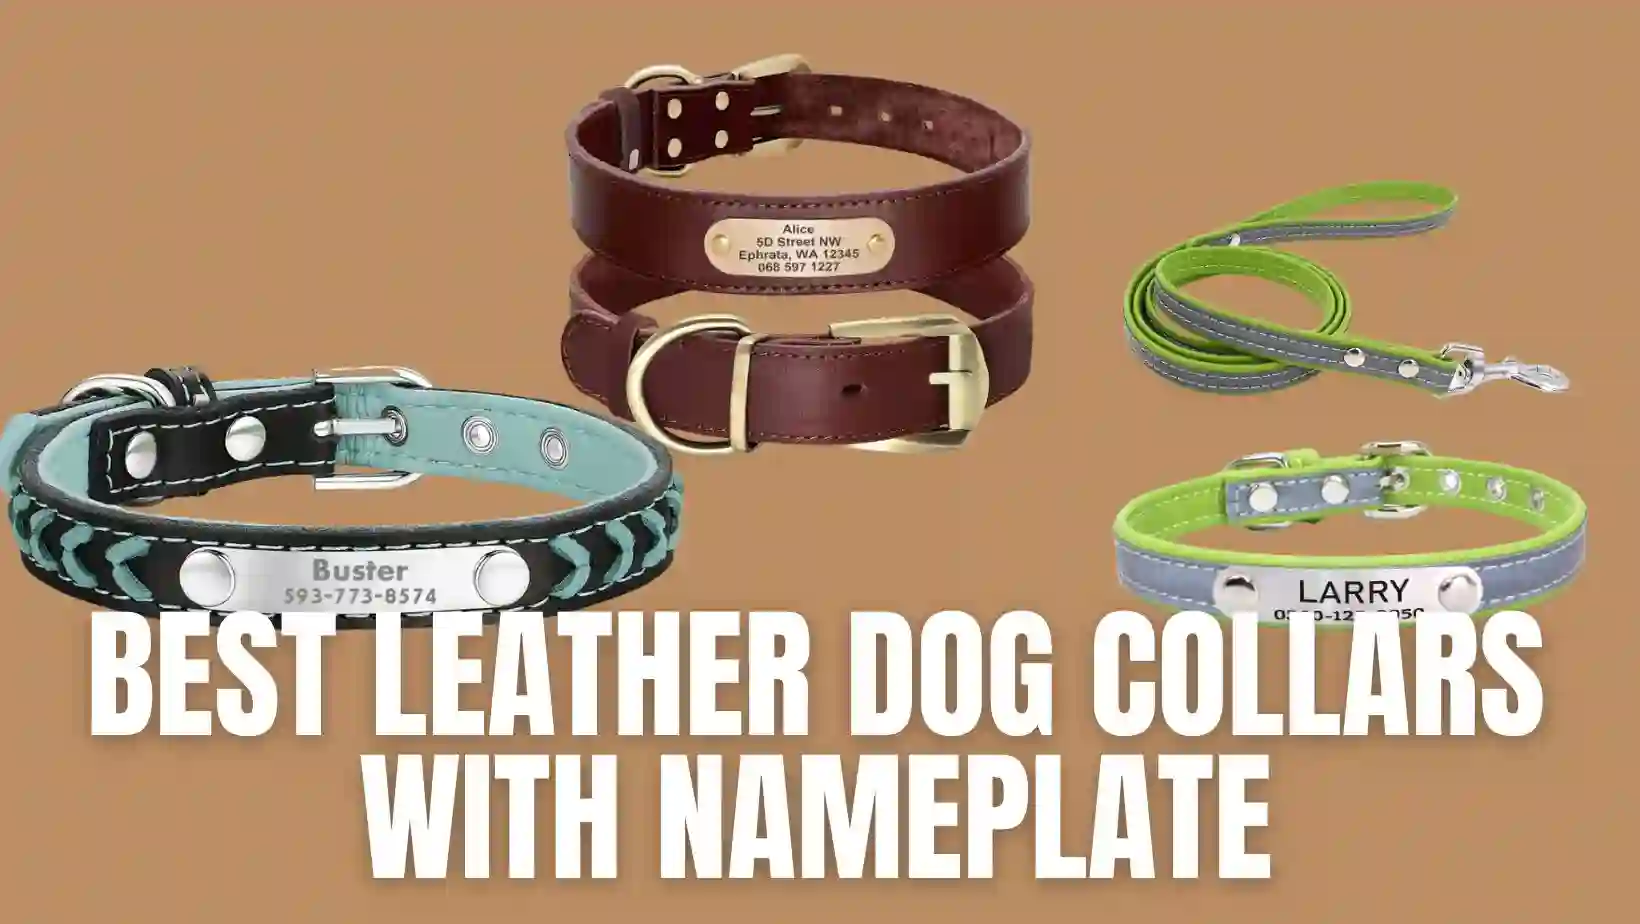 Best Leather Dog Collars with Nameplate